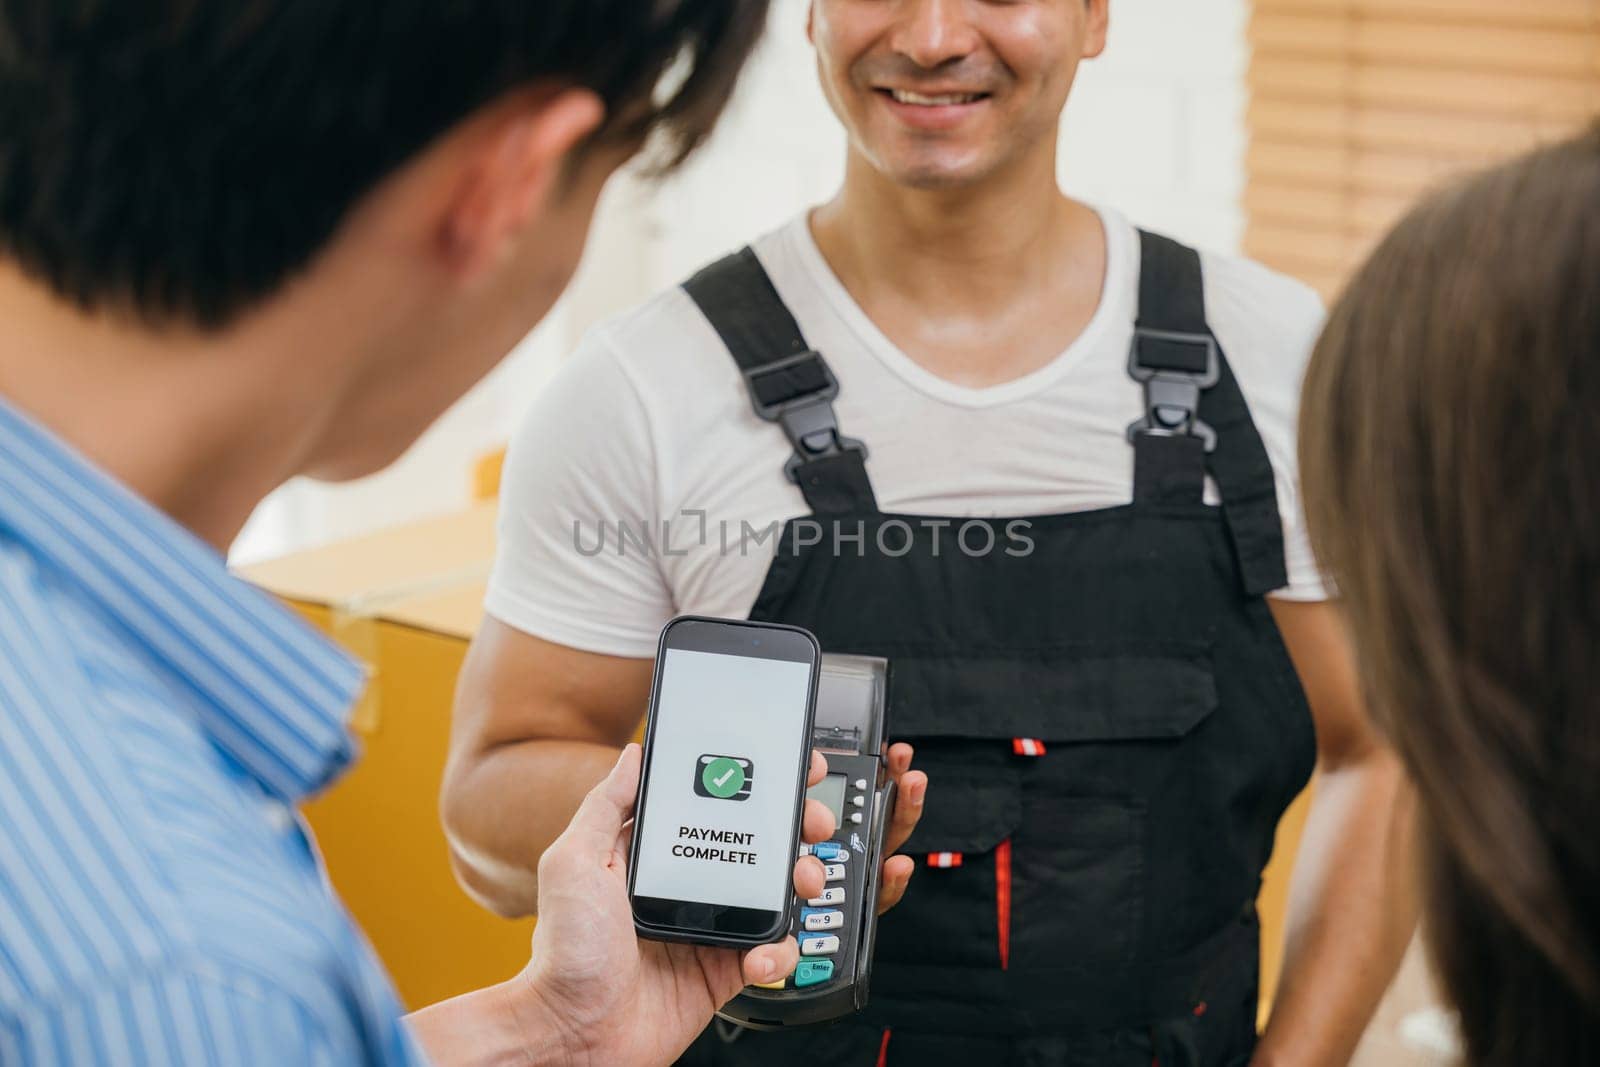 Post-moving couple scans QR code to pay via smartphone. Worker holds a box. Professional movers ensure quality home relocation. Business and industry shown. Online payment for moving